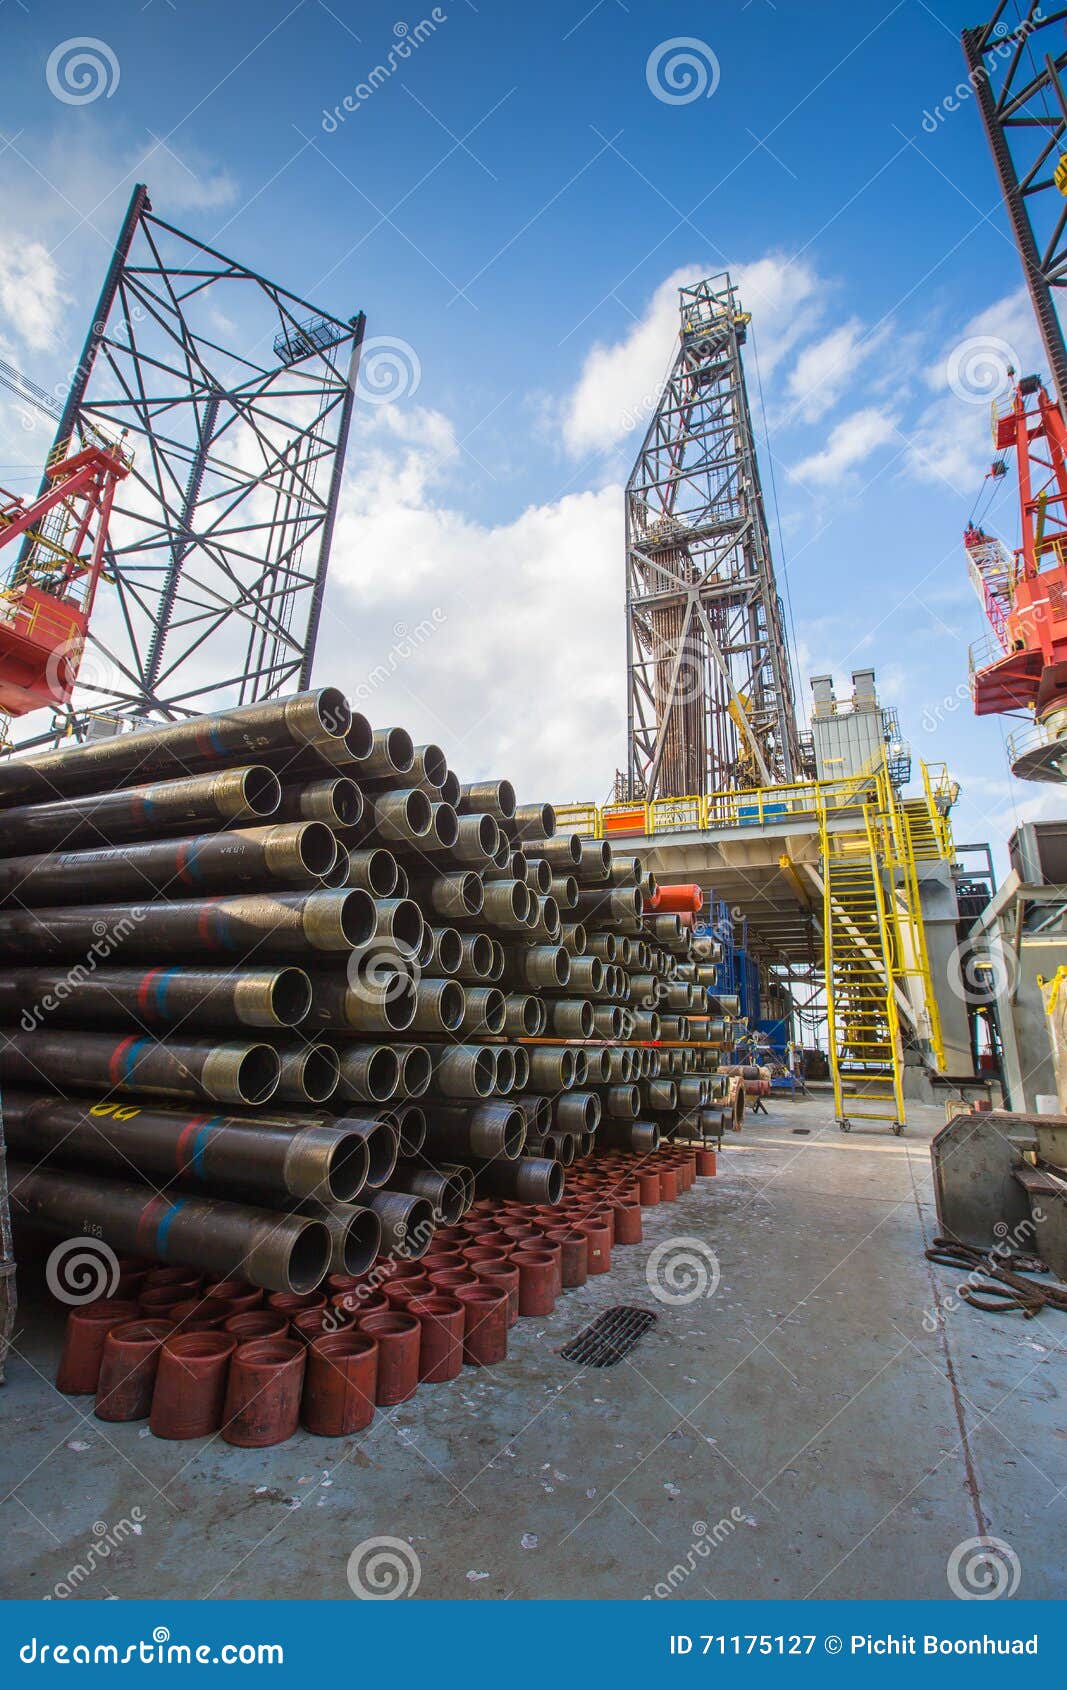 equipment for oil and gas completion at drilling rig